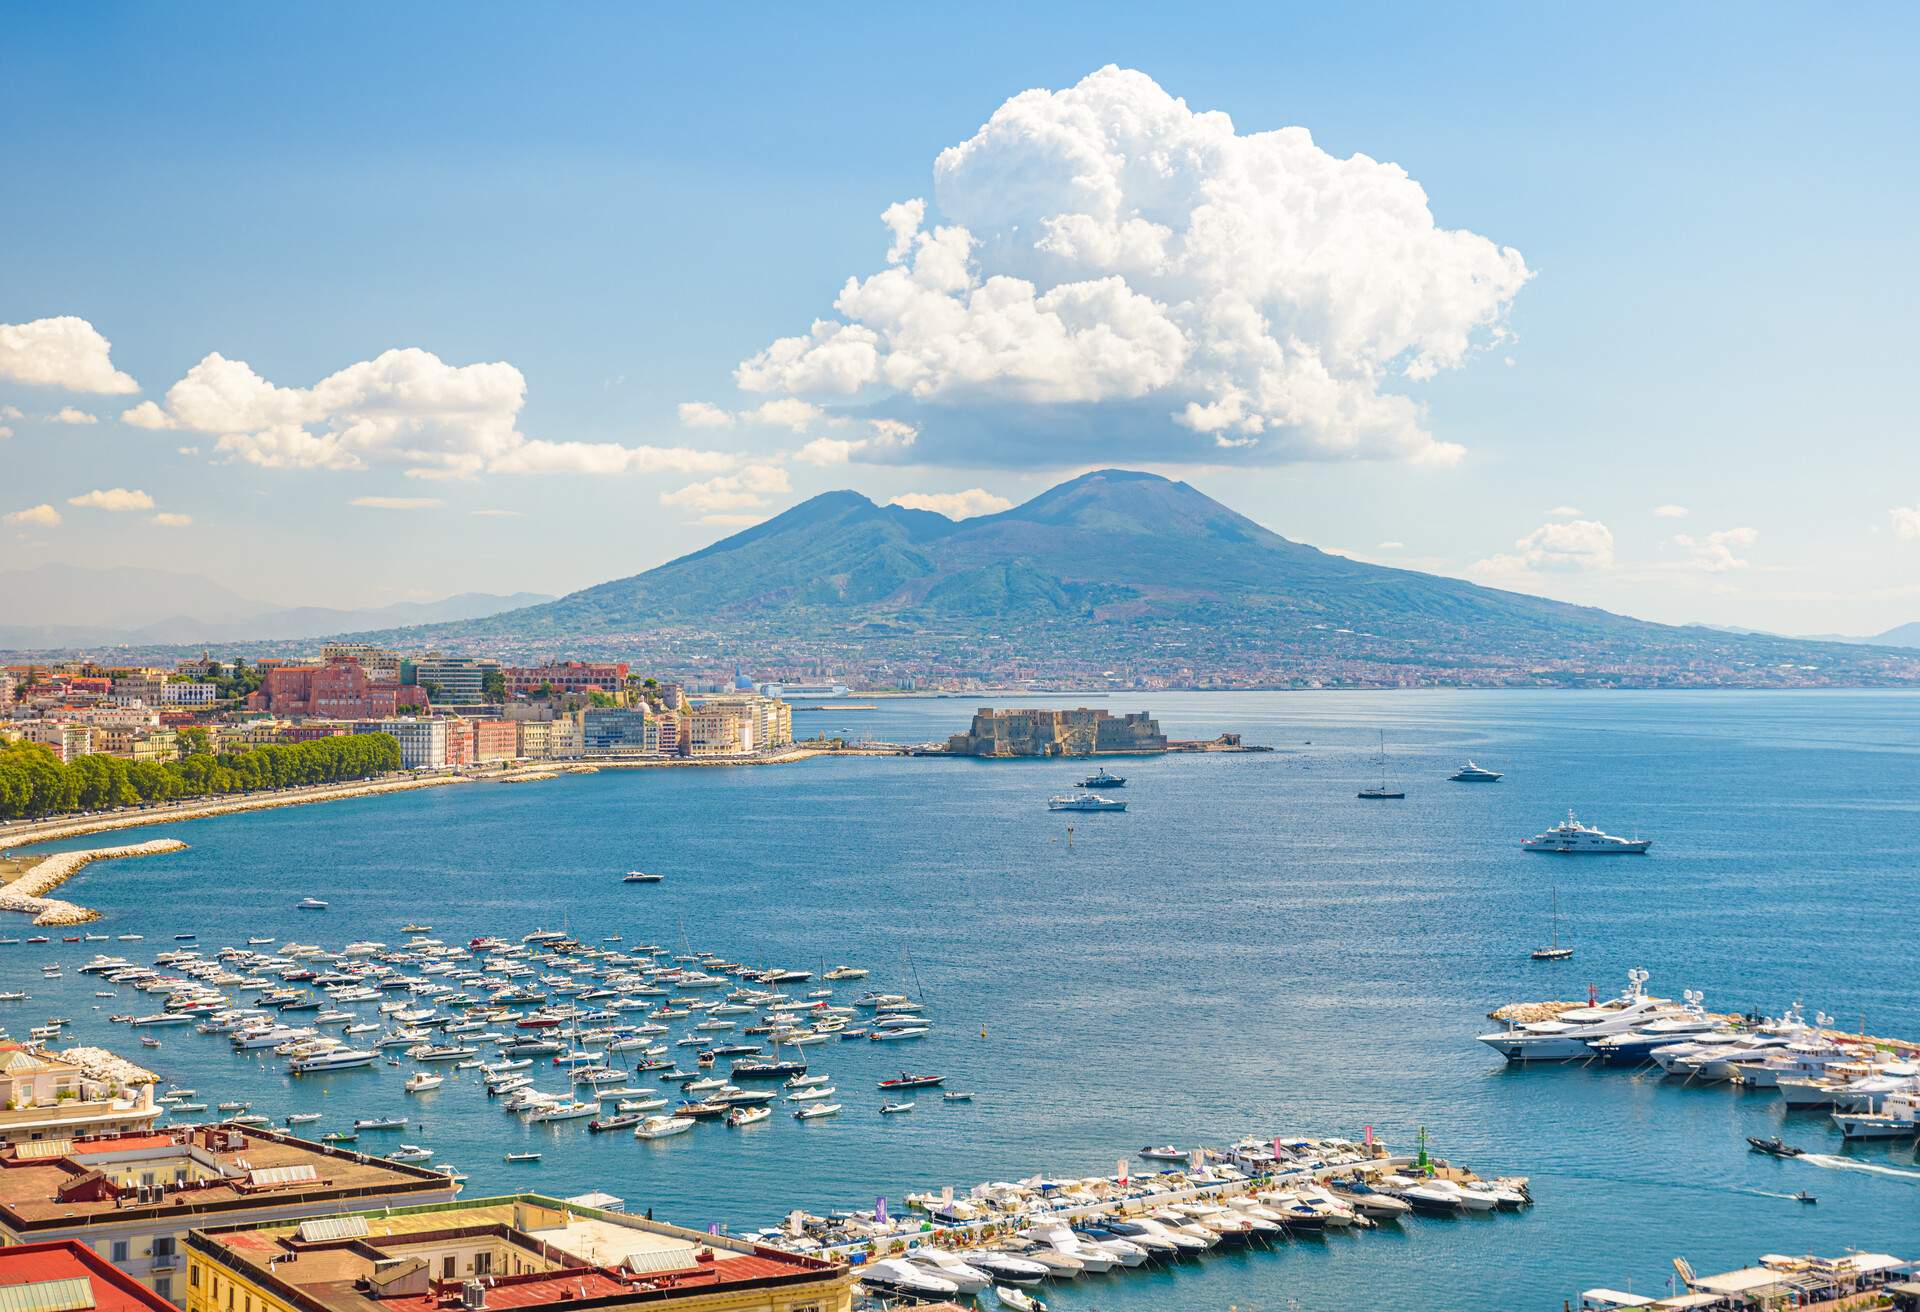 Naples, Italy. August 31, 2021. View of the Gulf of Naples from the Posillipo hill with Mount Vesuvius far in the background.